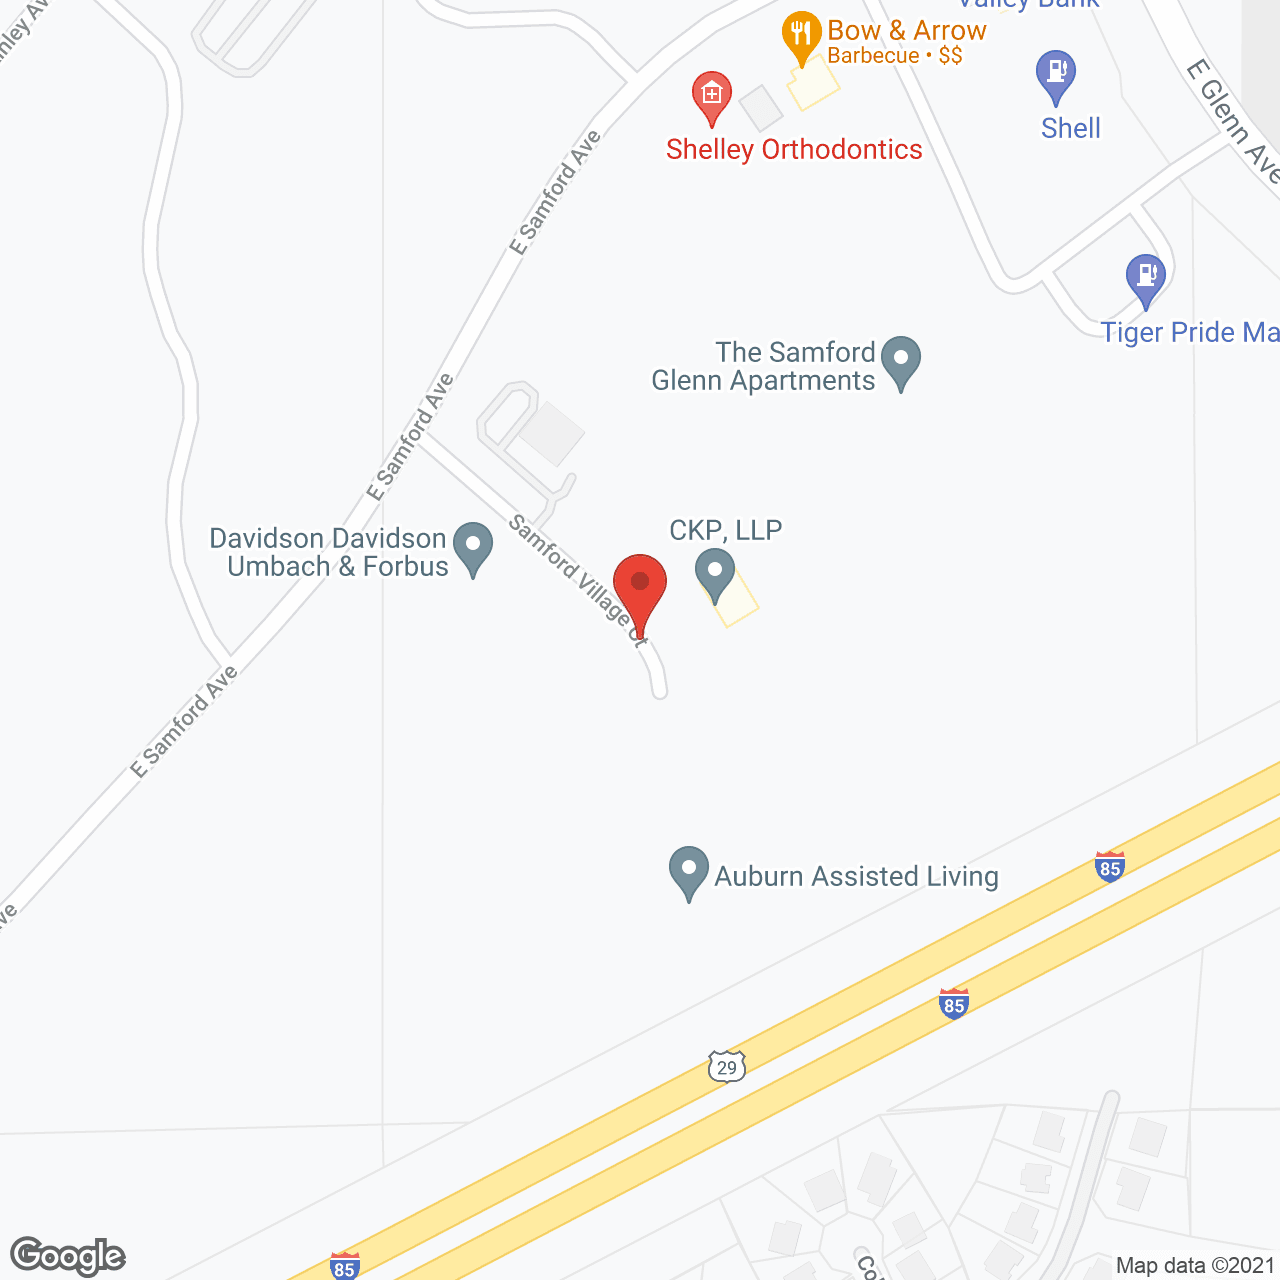 Auburn Assisted Living in google map